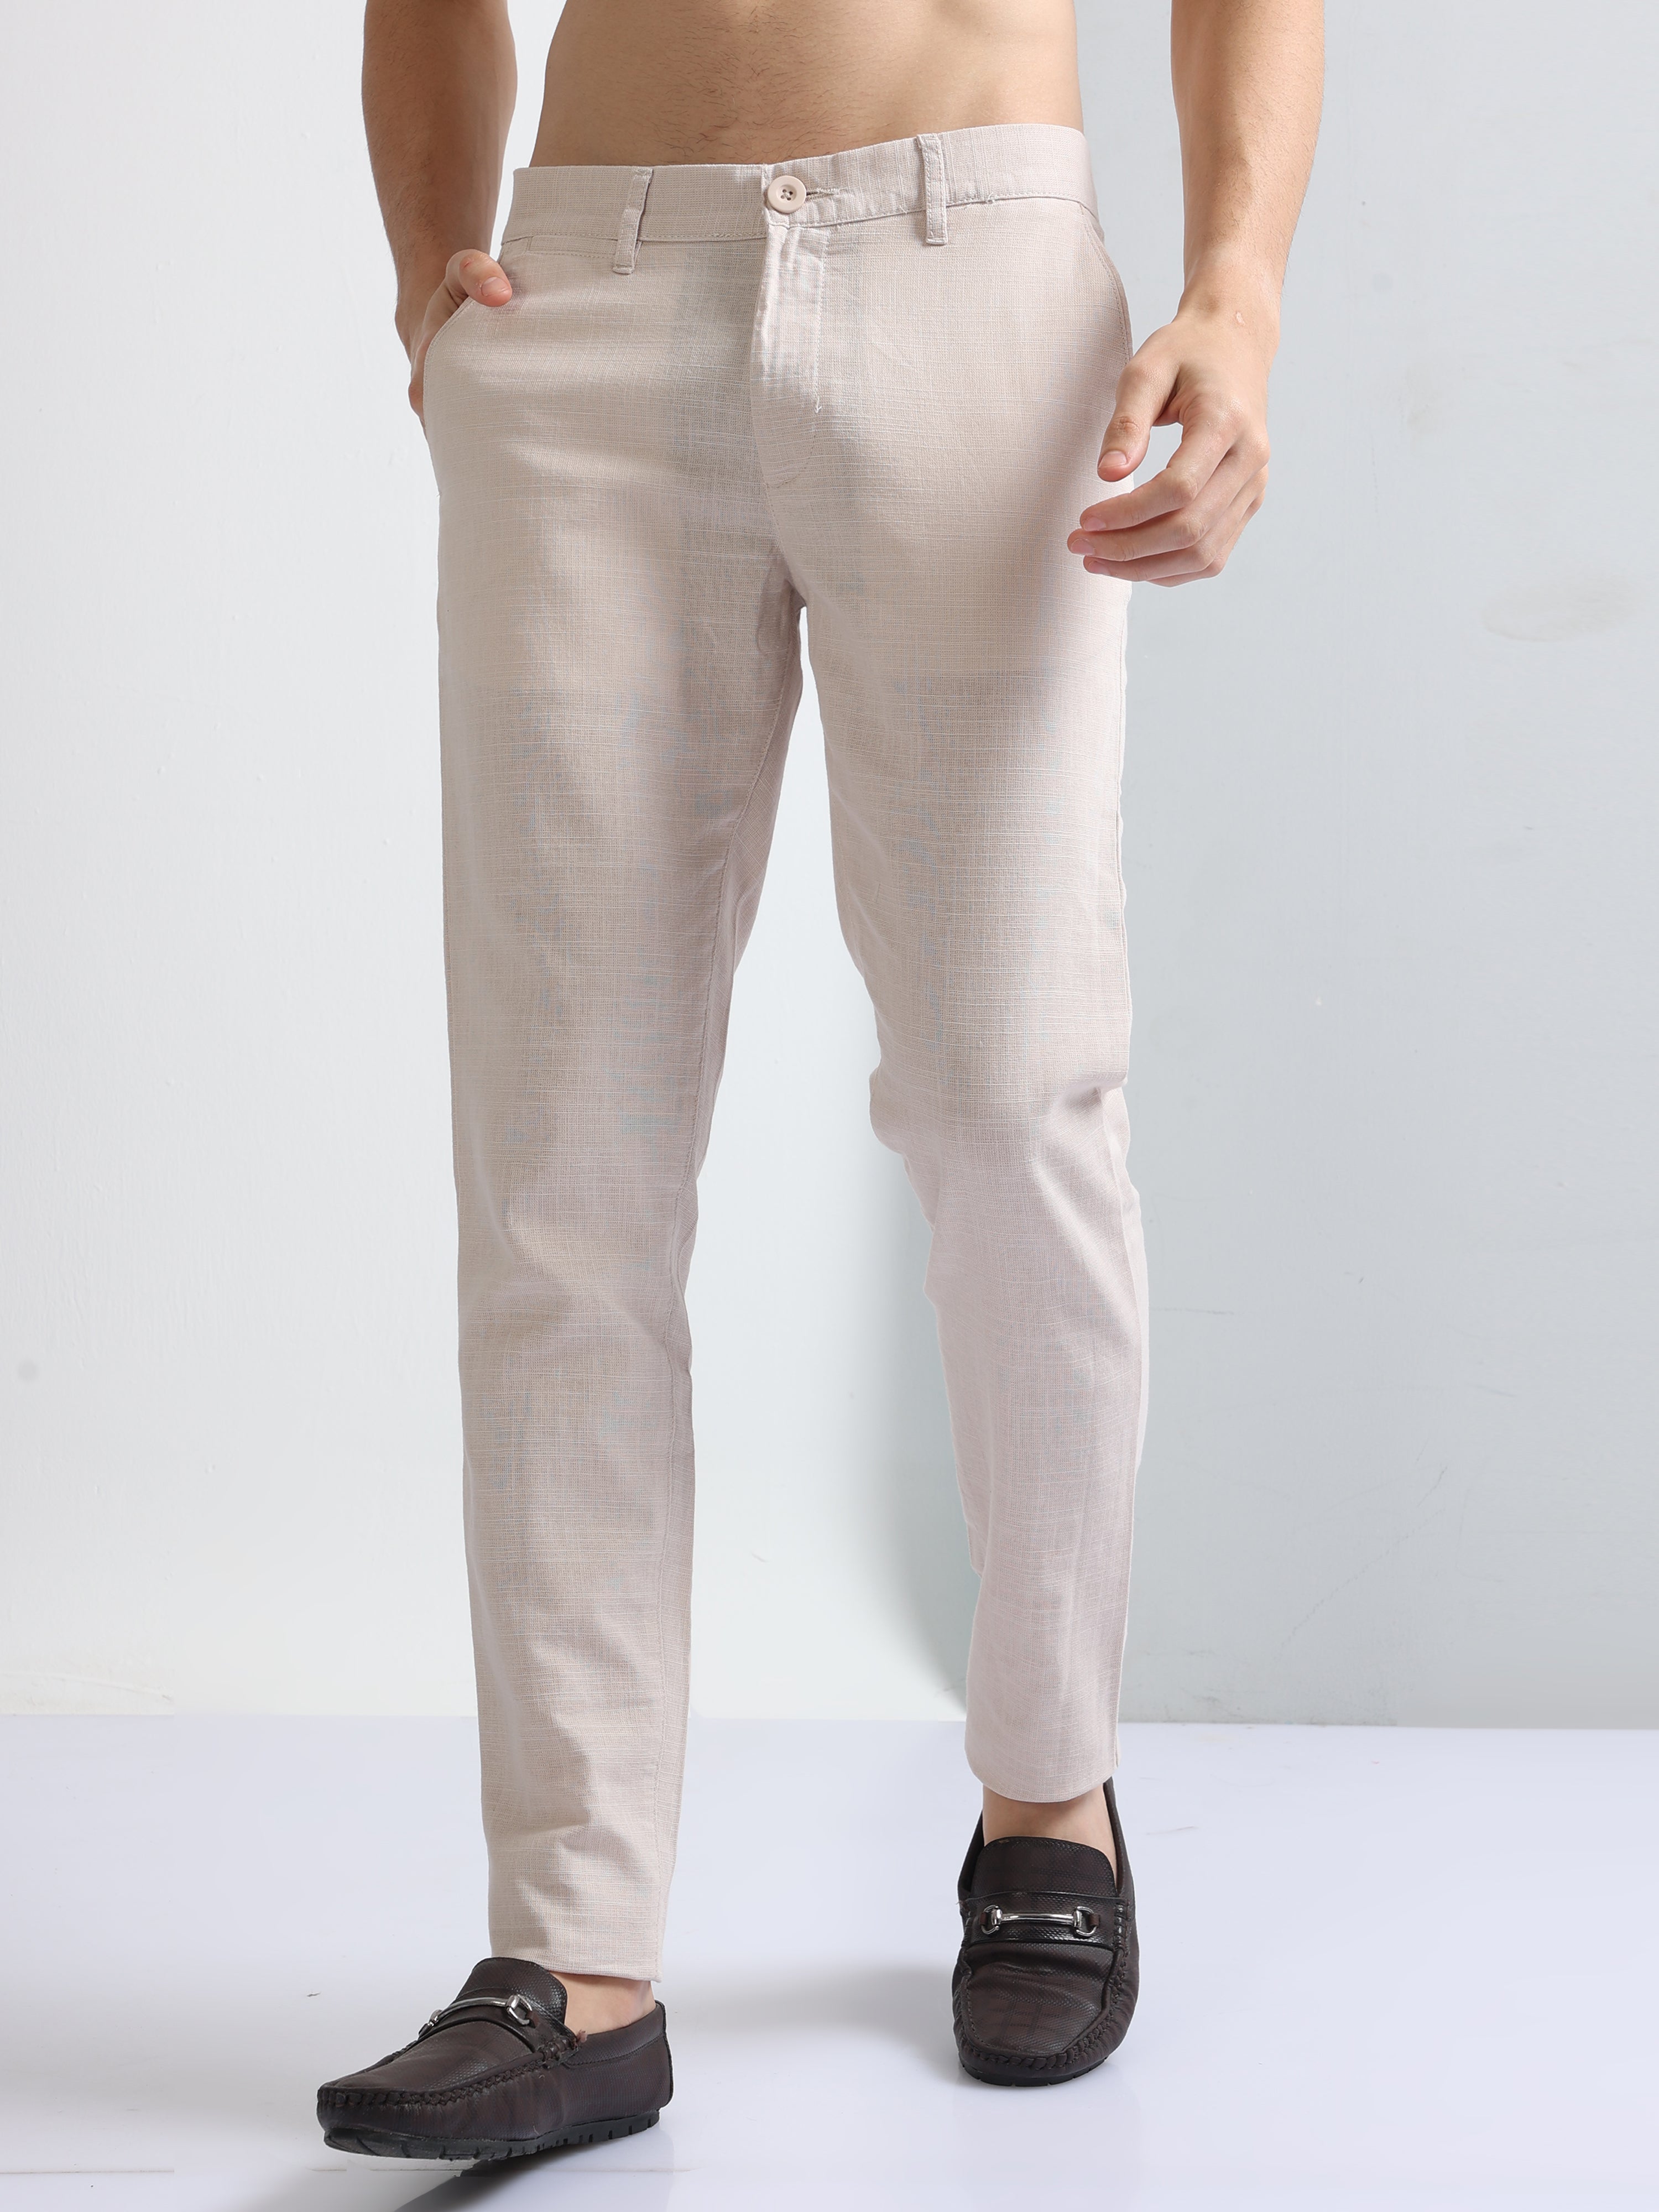 Buy Men's Trousers Online at Outfitters